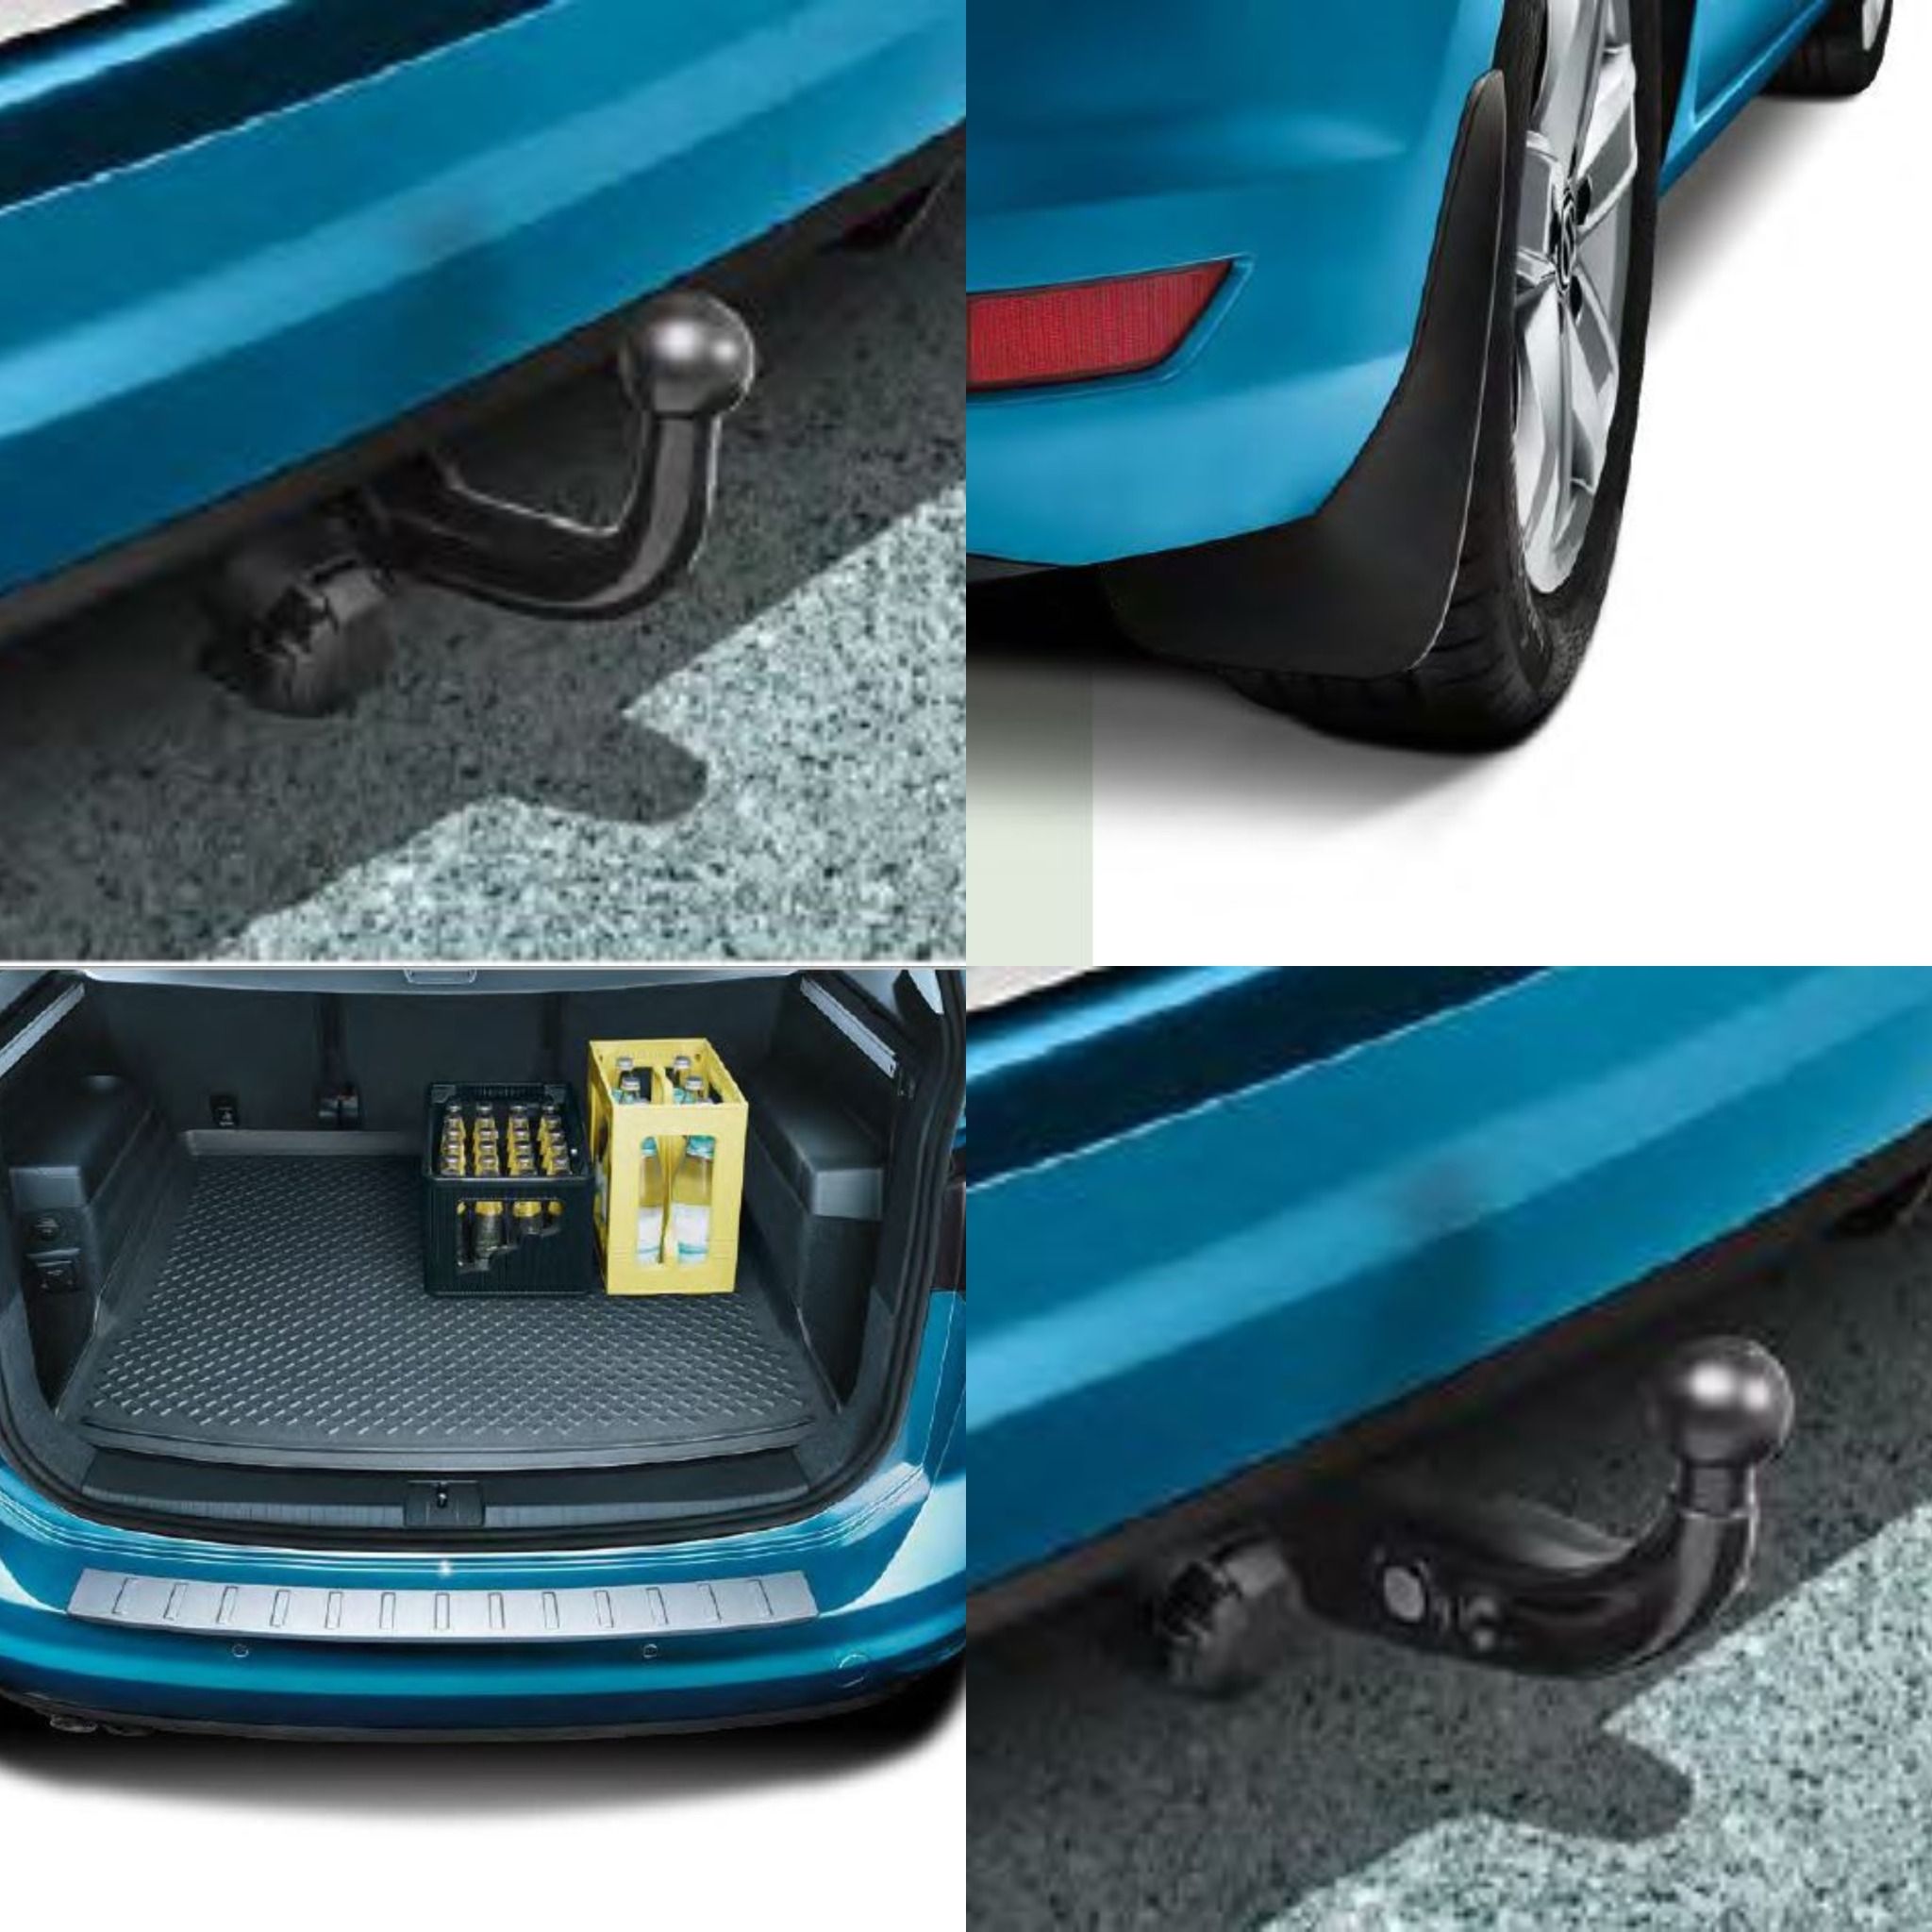 Close up of Volkswagen Touran towbar, boot cover and wheel cover